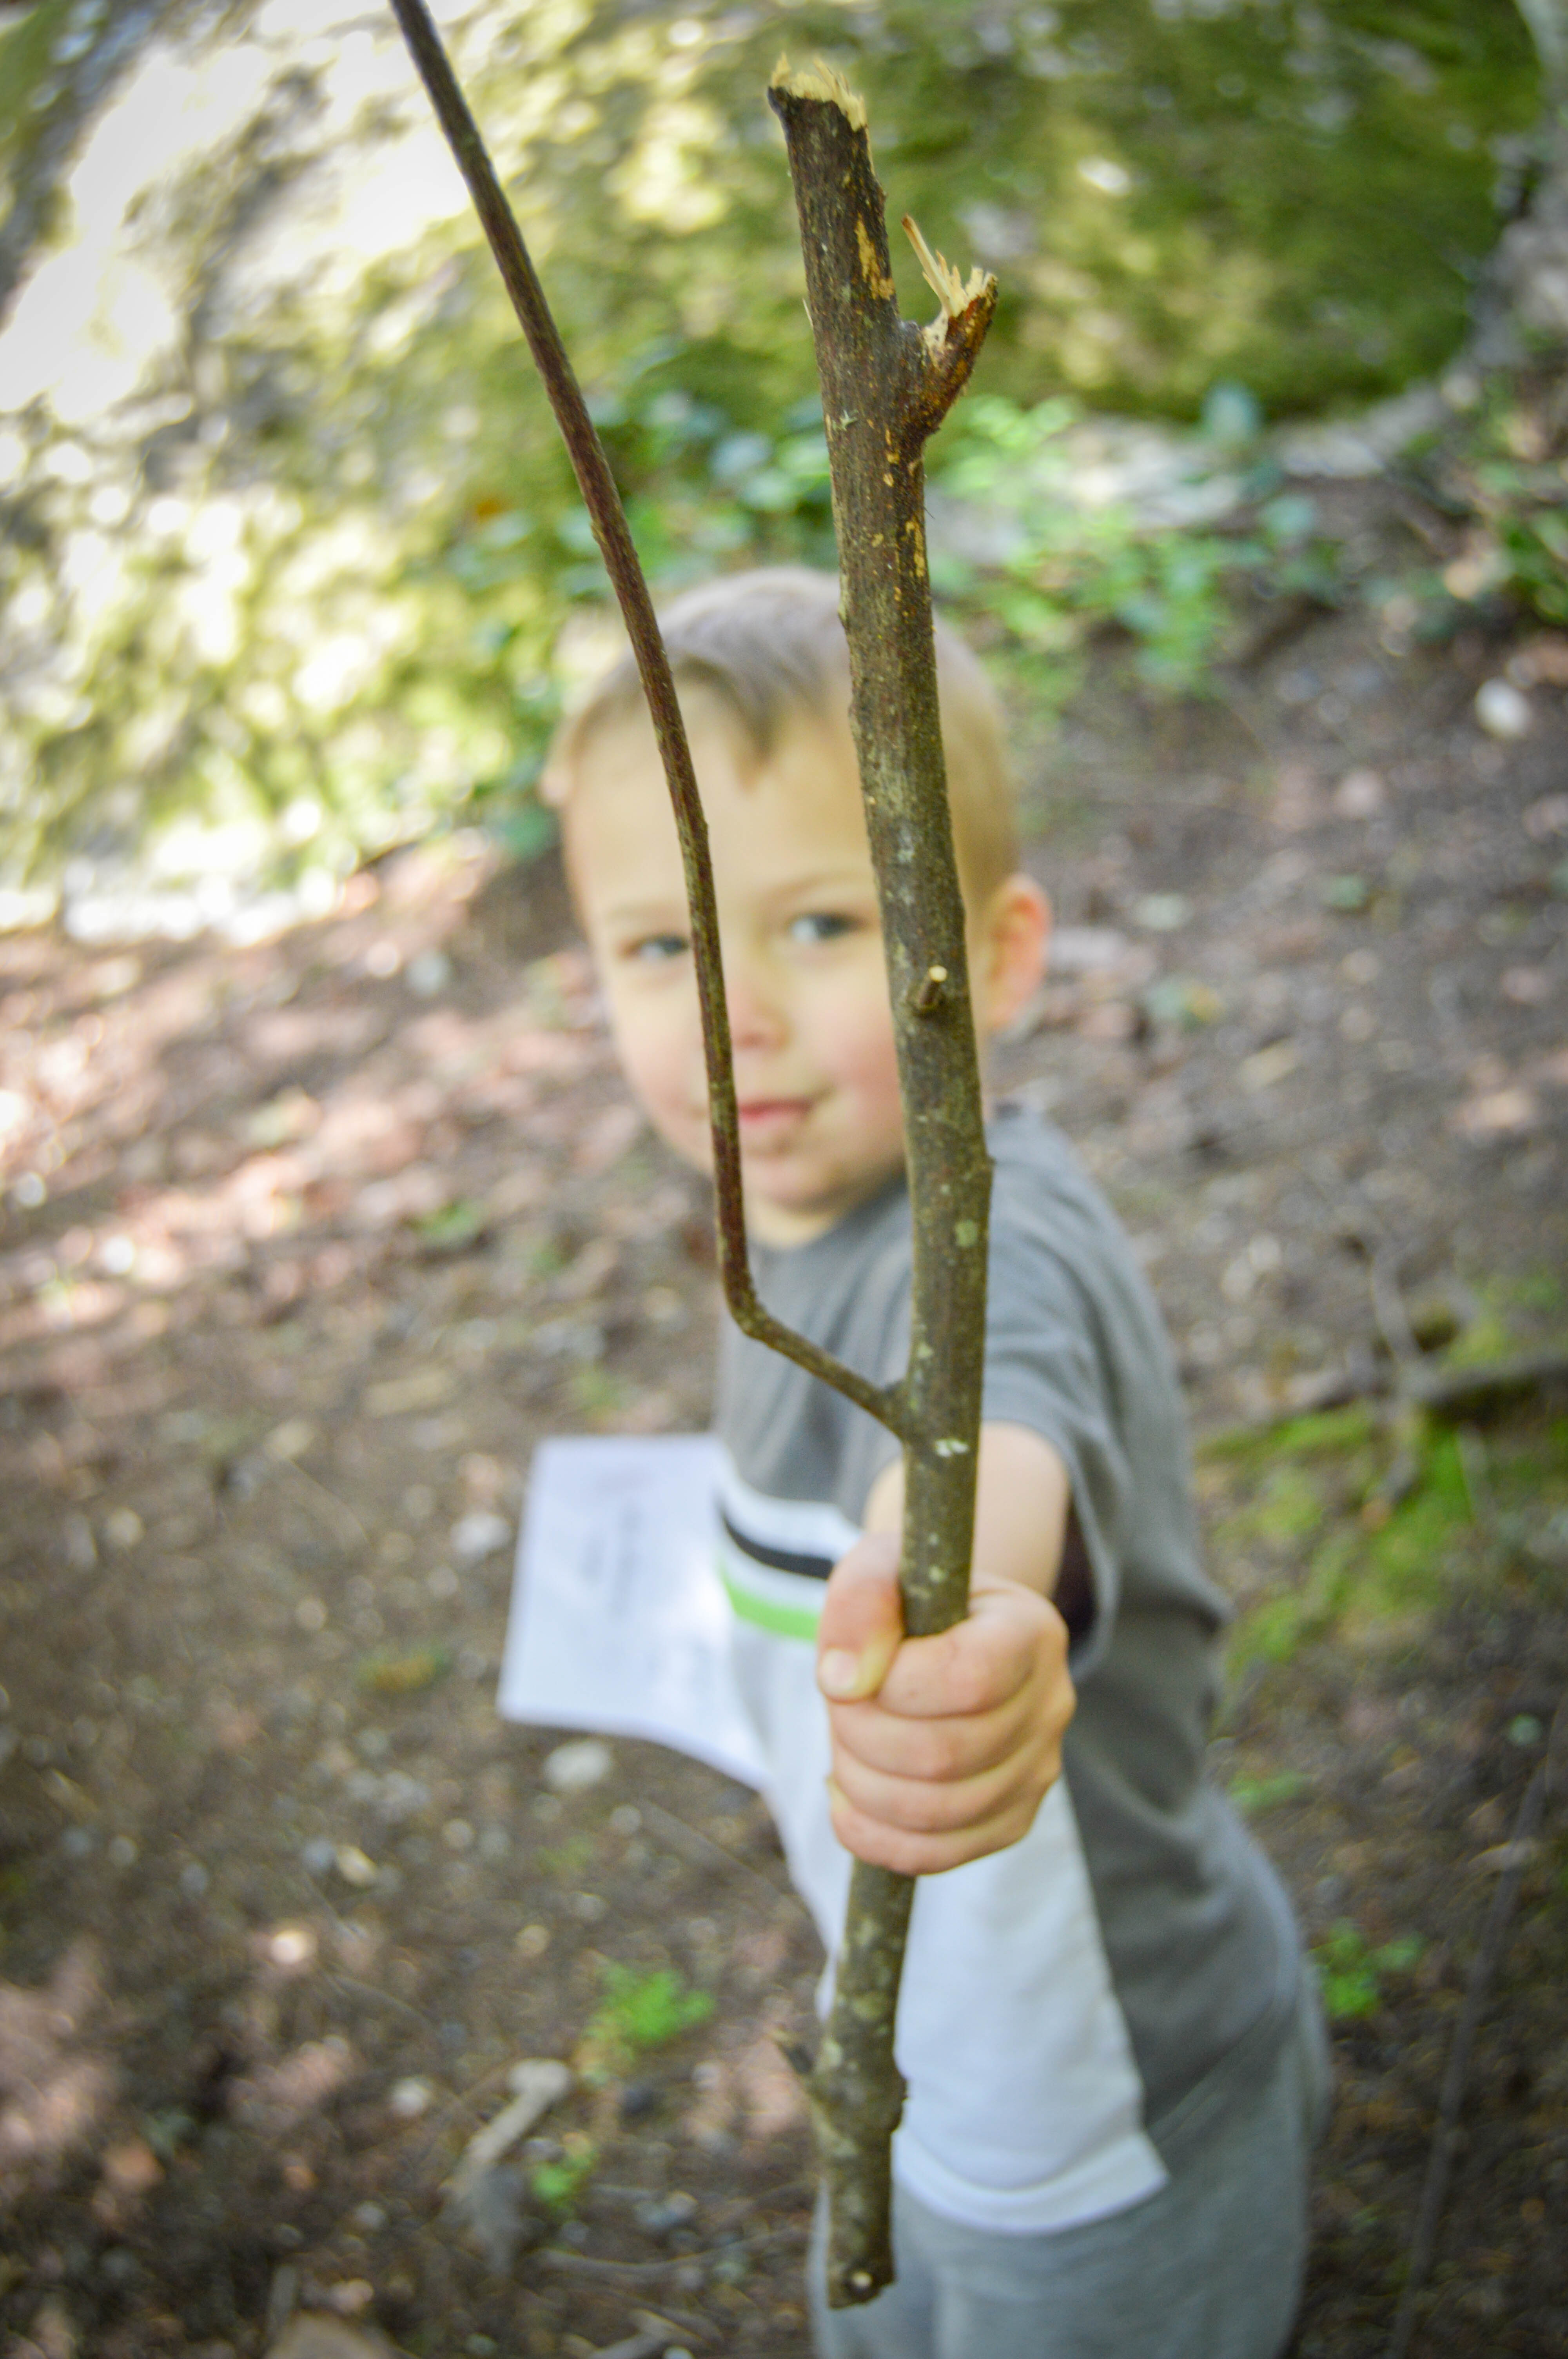 Fun Camping Activities for Toddlers #5 - Go on a nature scavenger hunt